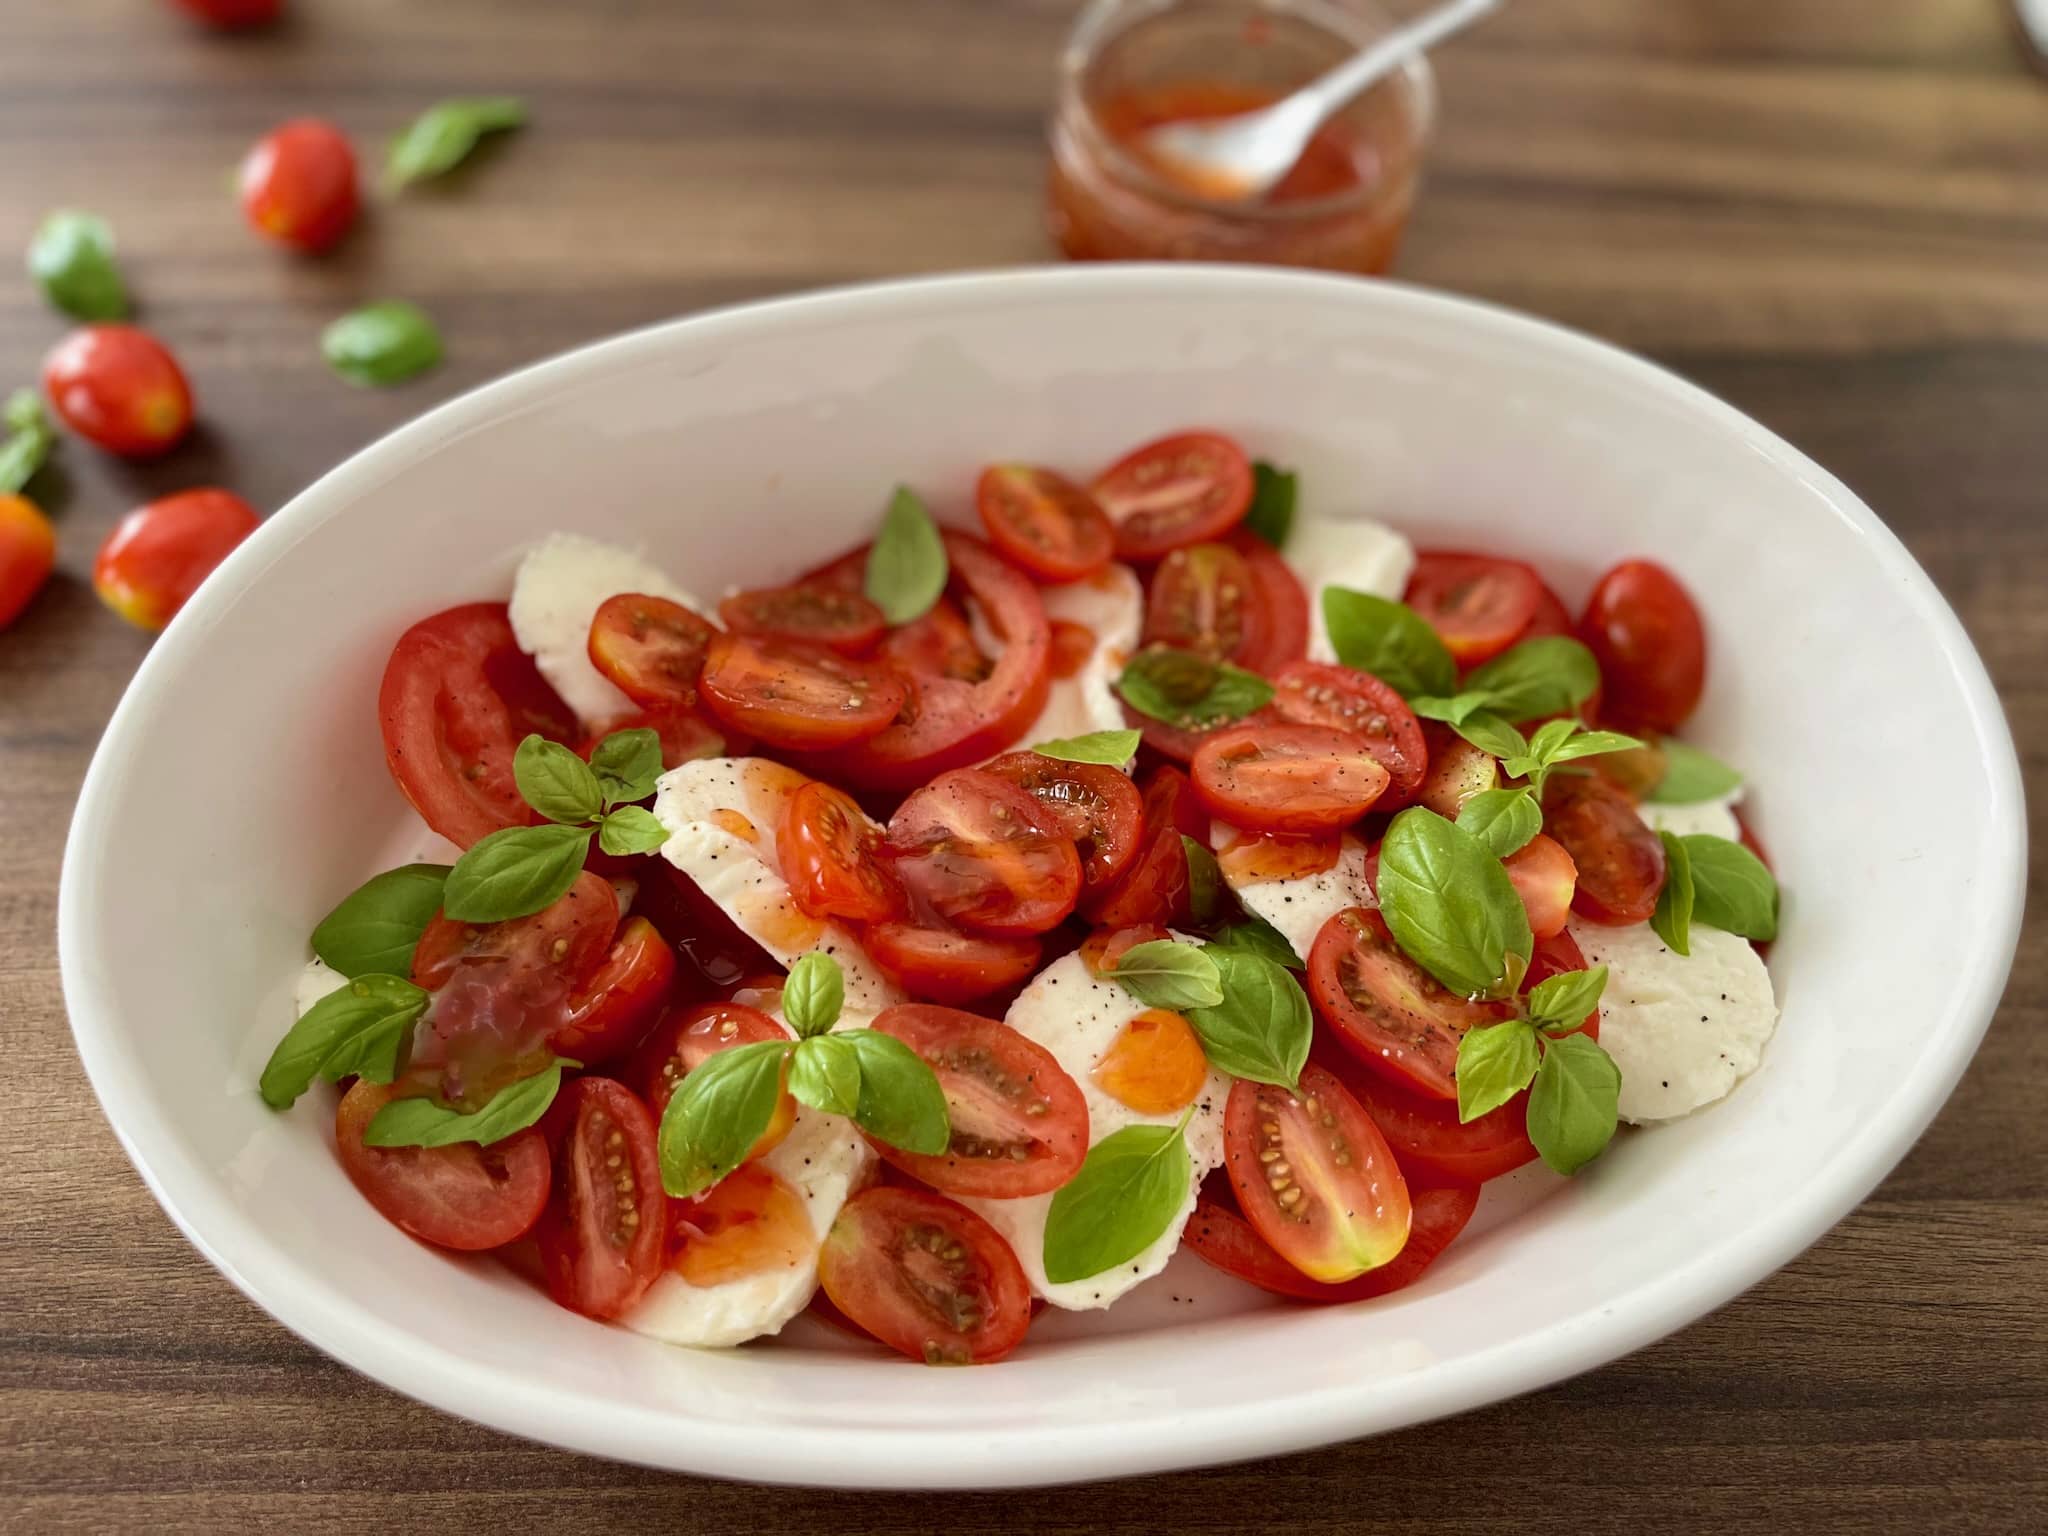 Tomatoes &amp; Mozzarella Salad in a bowl, drizzled with Sweet Chilli Sauce